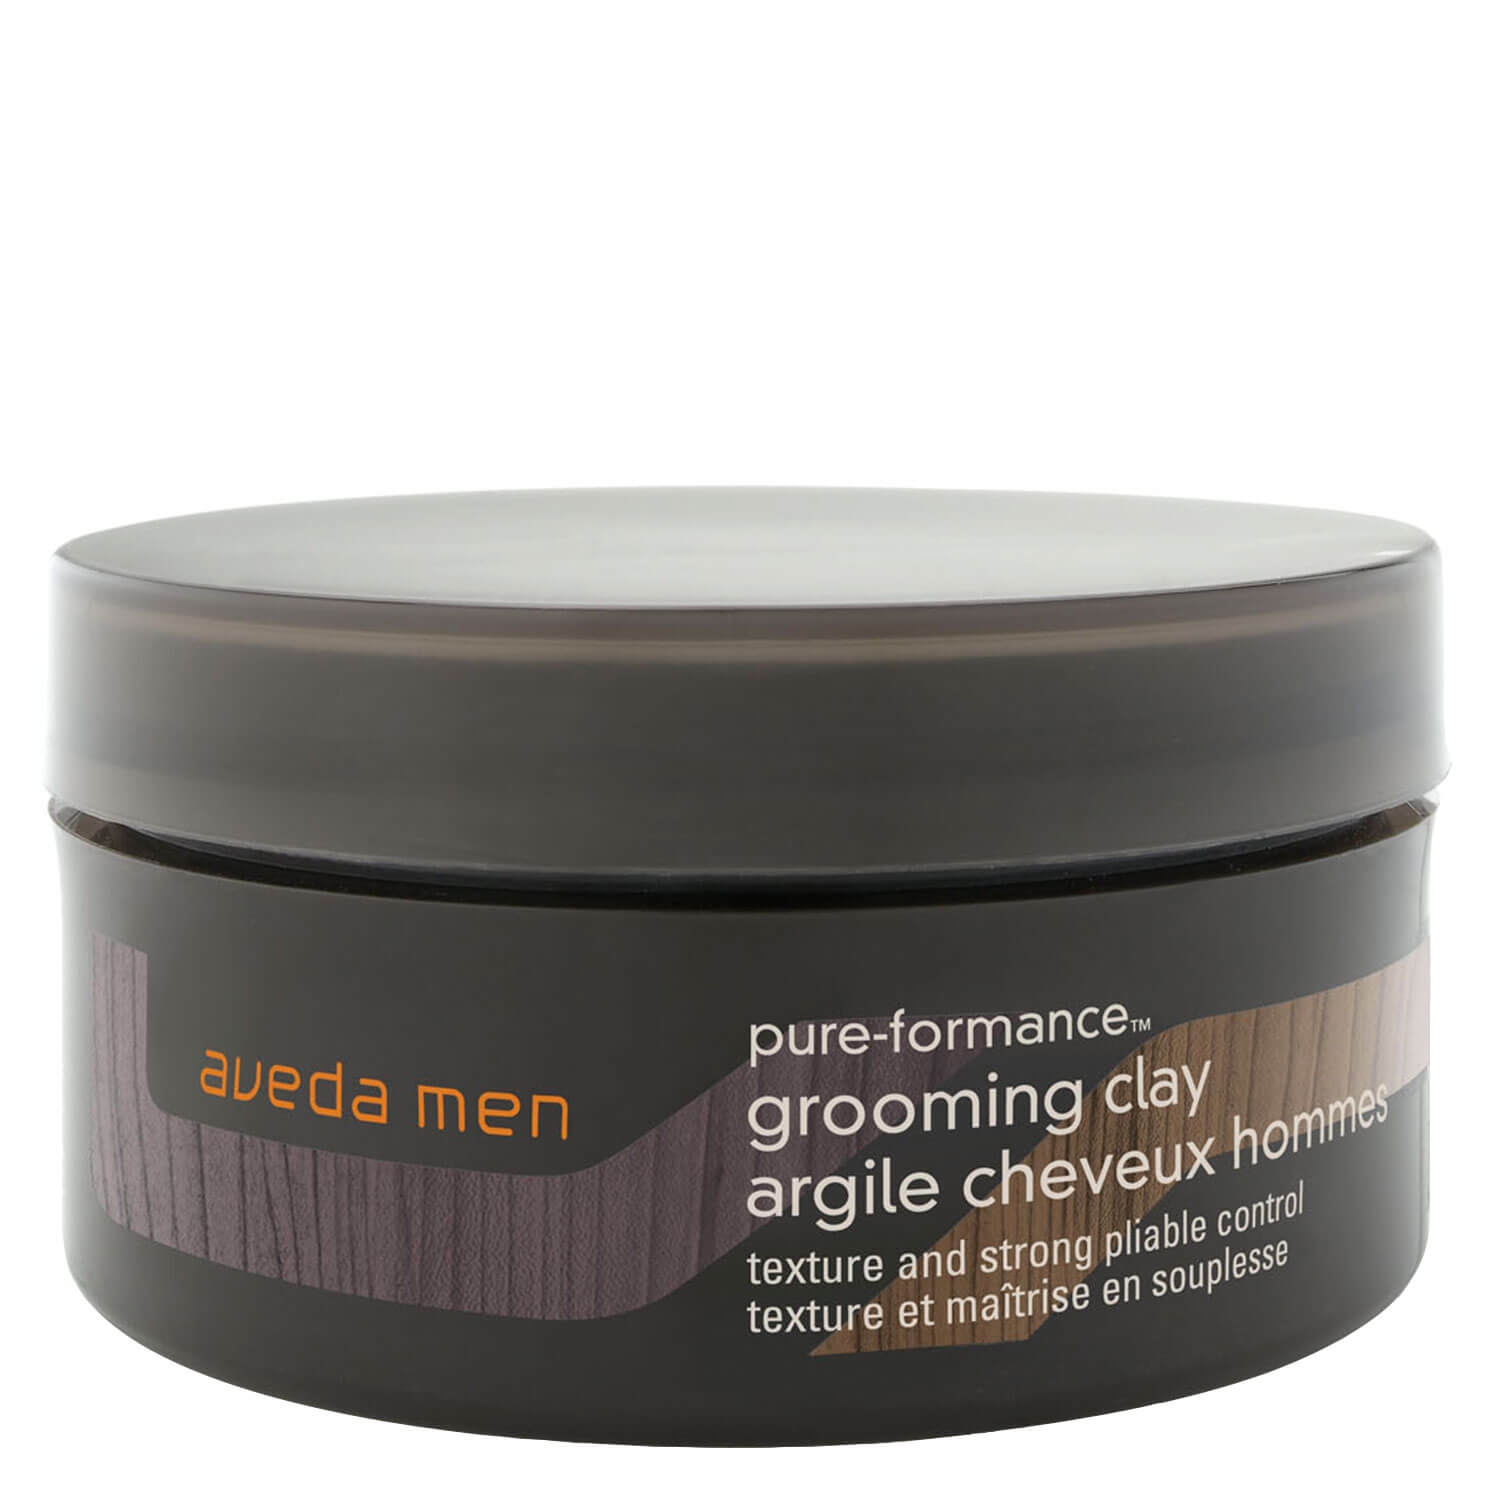 Product image from men pure-formance - grooming clay